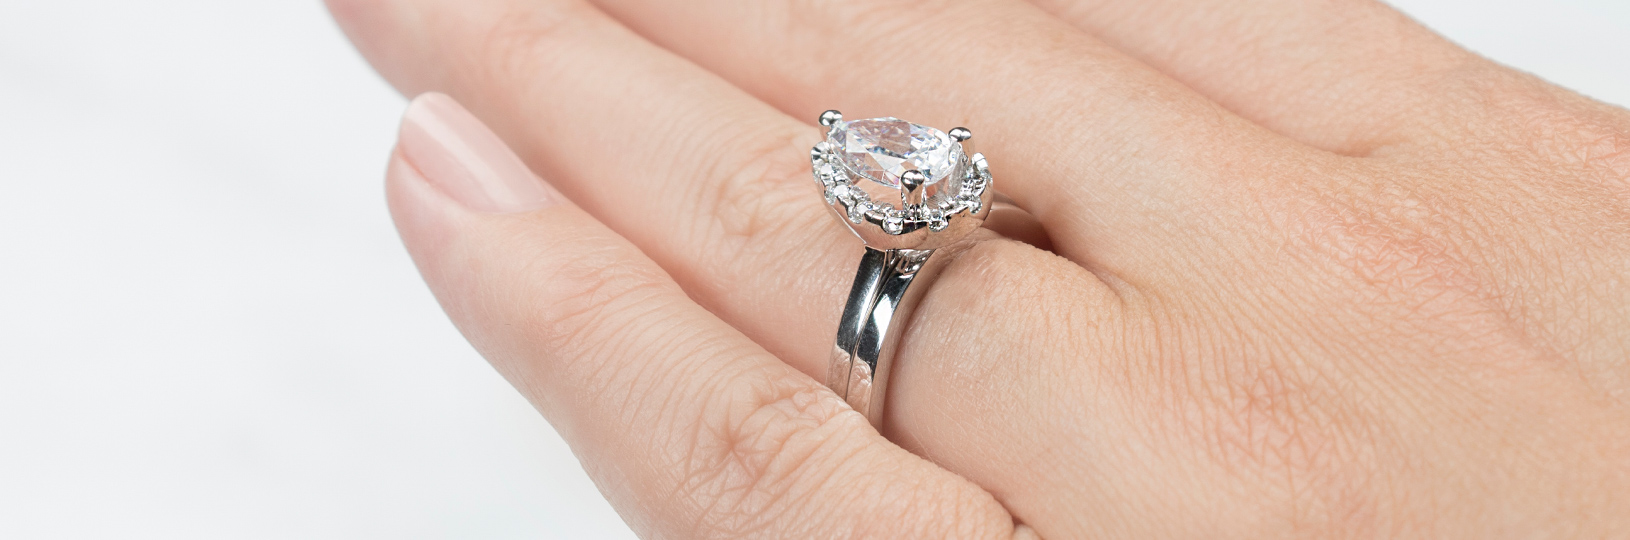 Does the Wedding Band Come With the Engagement Ring? - Diamond Nexus